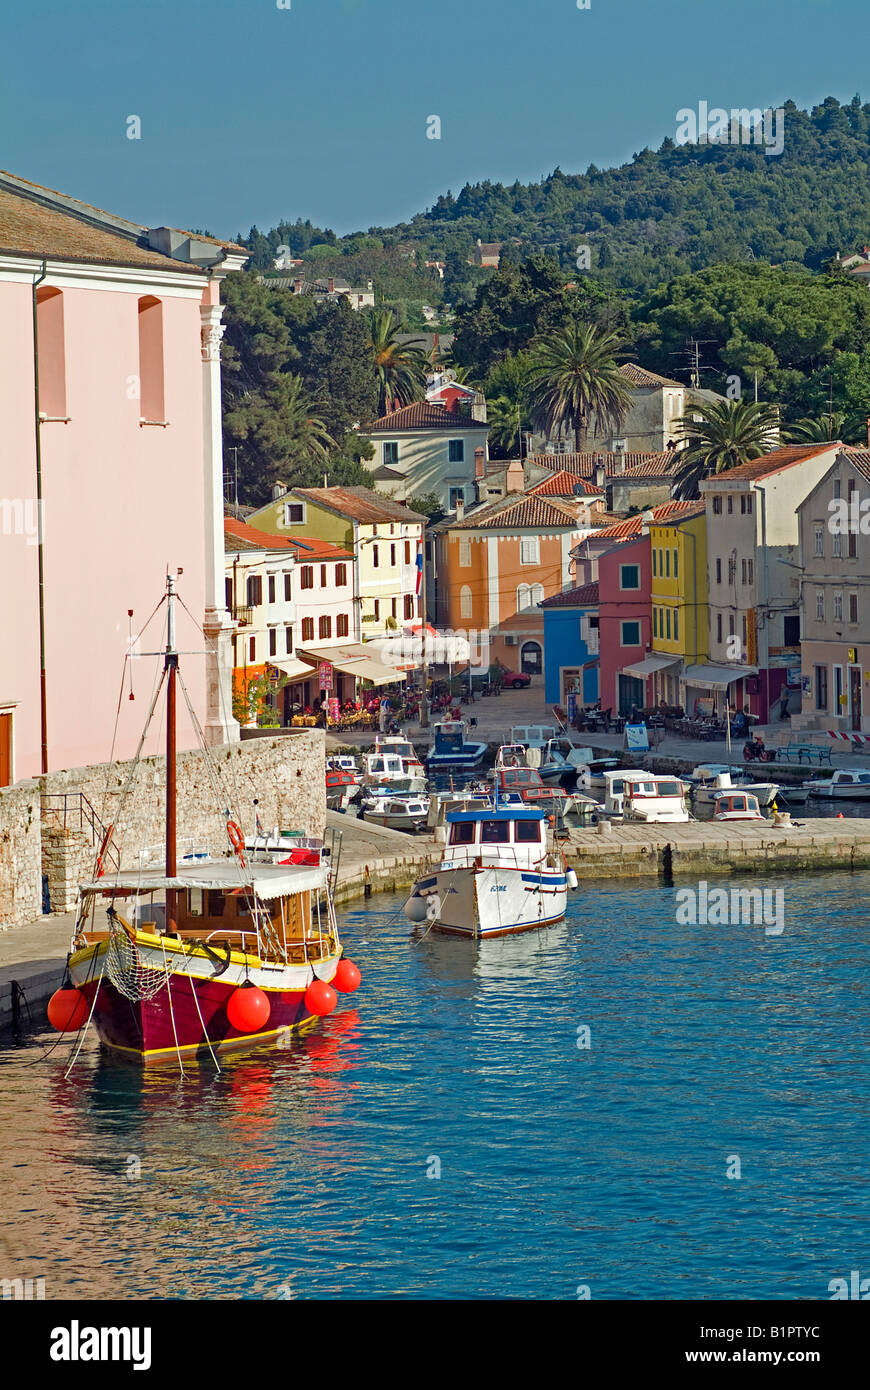 pastel coloured houses in the Port bassin with fisher boats and motor boats  in the town Veli Losinj on the island Losinj Stock Photo - Alamy